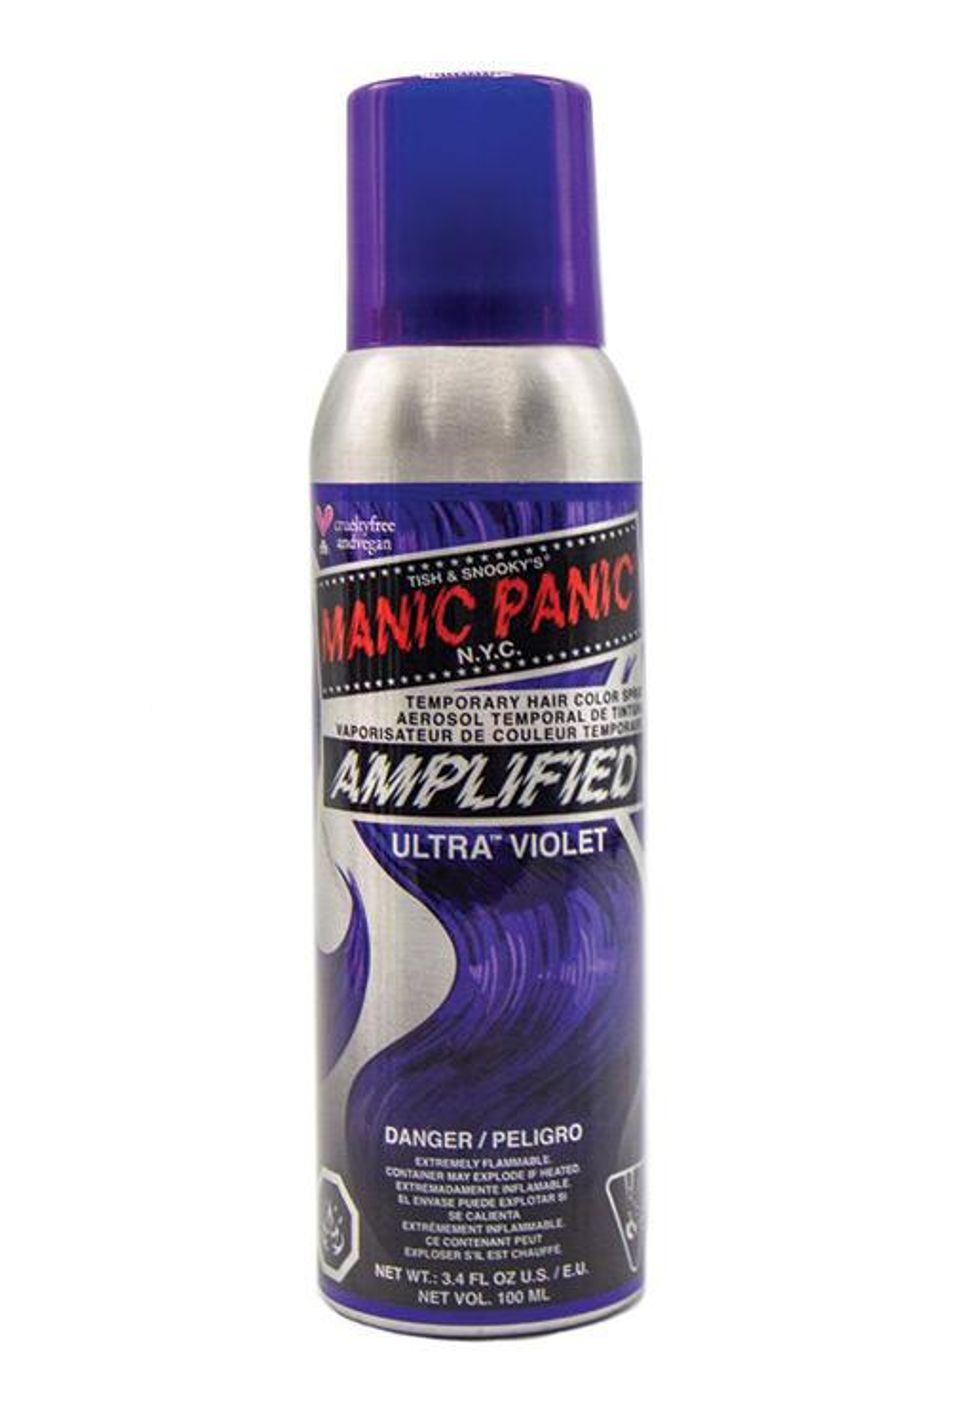 Manic Panic\u2019s queer faves: temporary unicorn hair colors! ($10 and up, ManicPanic.com)